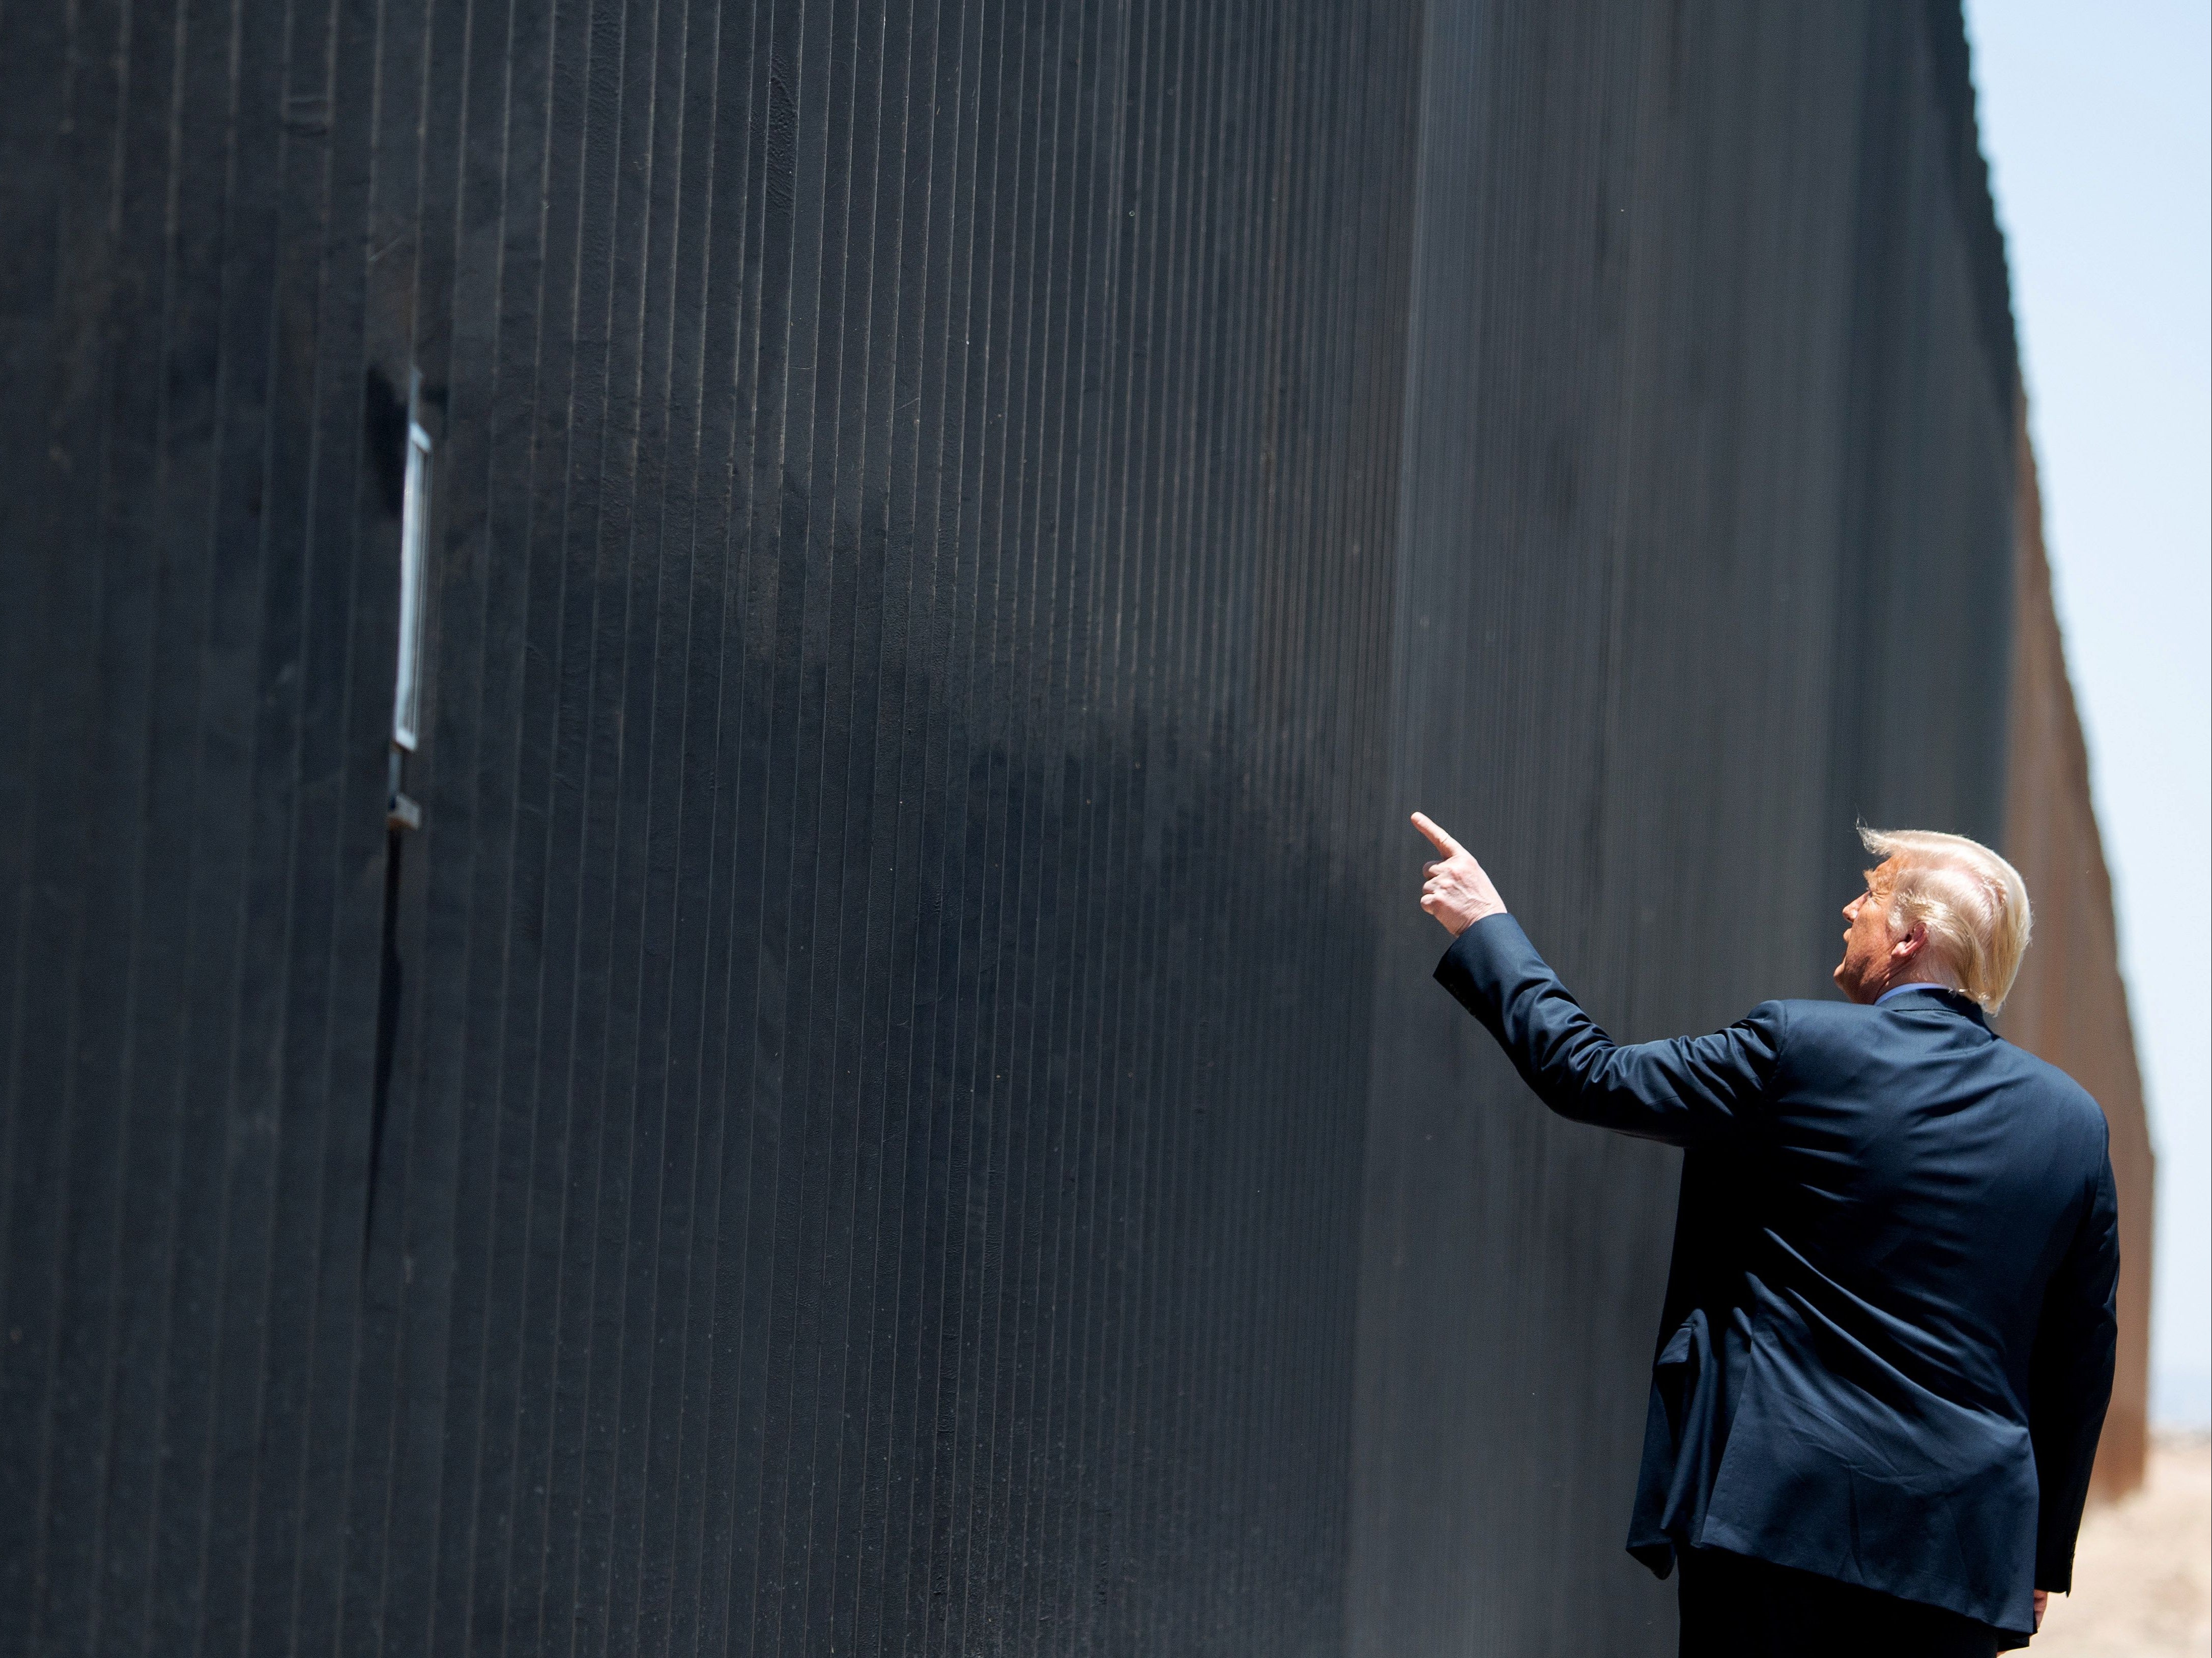 Donald Trump at the border wall with Mexico last year